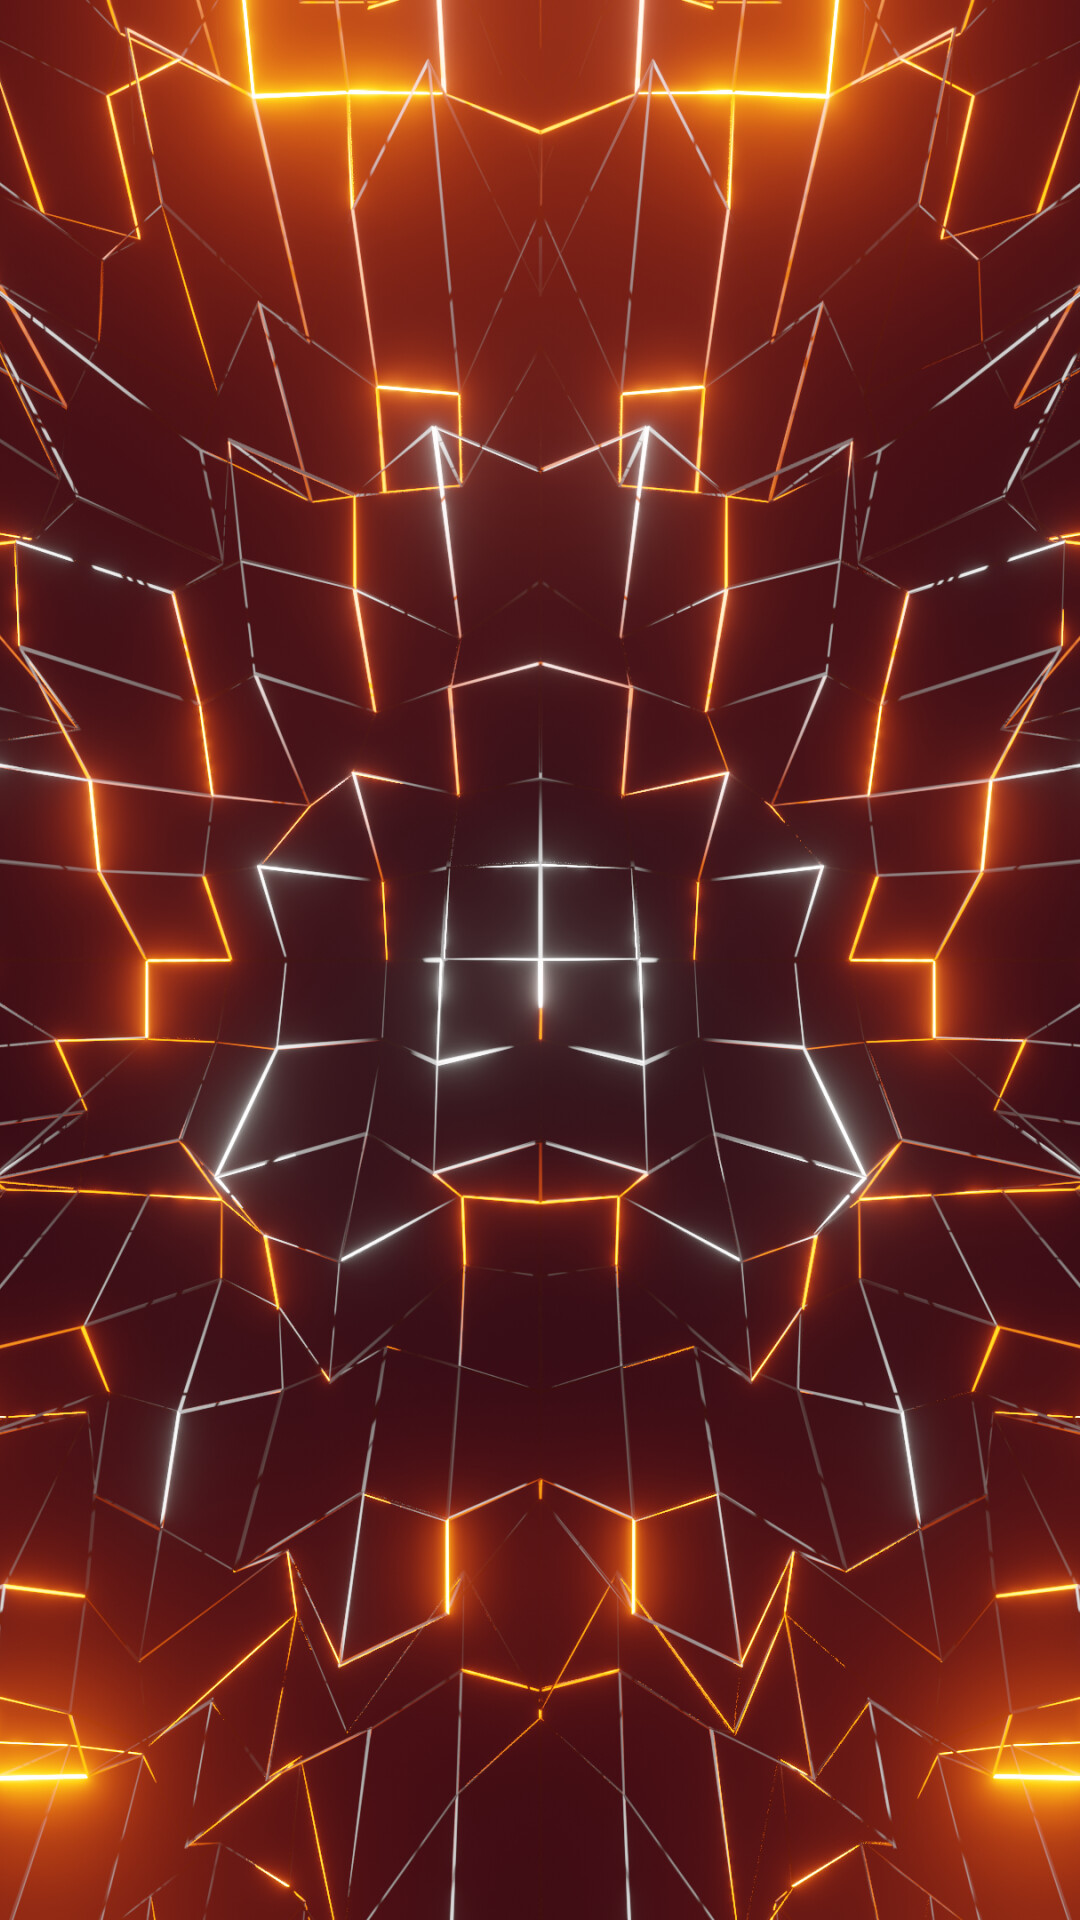 Glow in the Dark: Cosmic light, Flashing lines, Abstract symmetry. 1080x1920 Full HD Background.